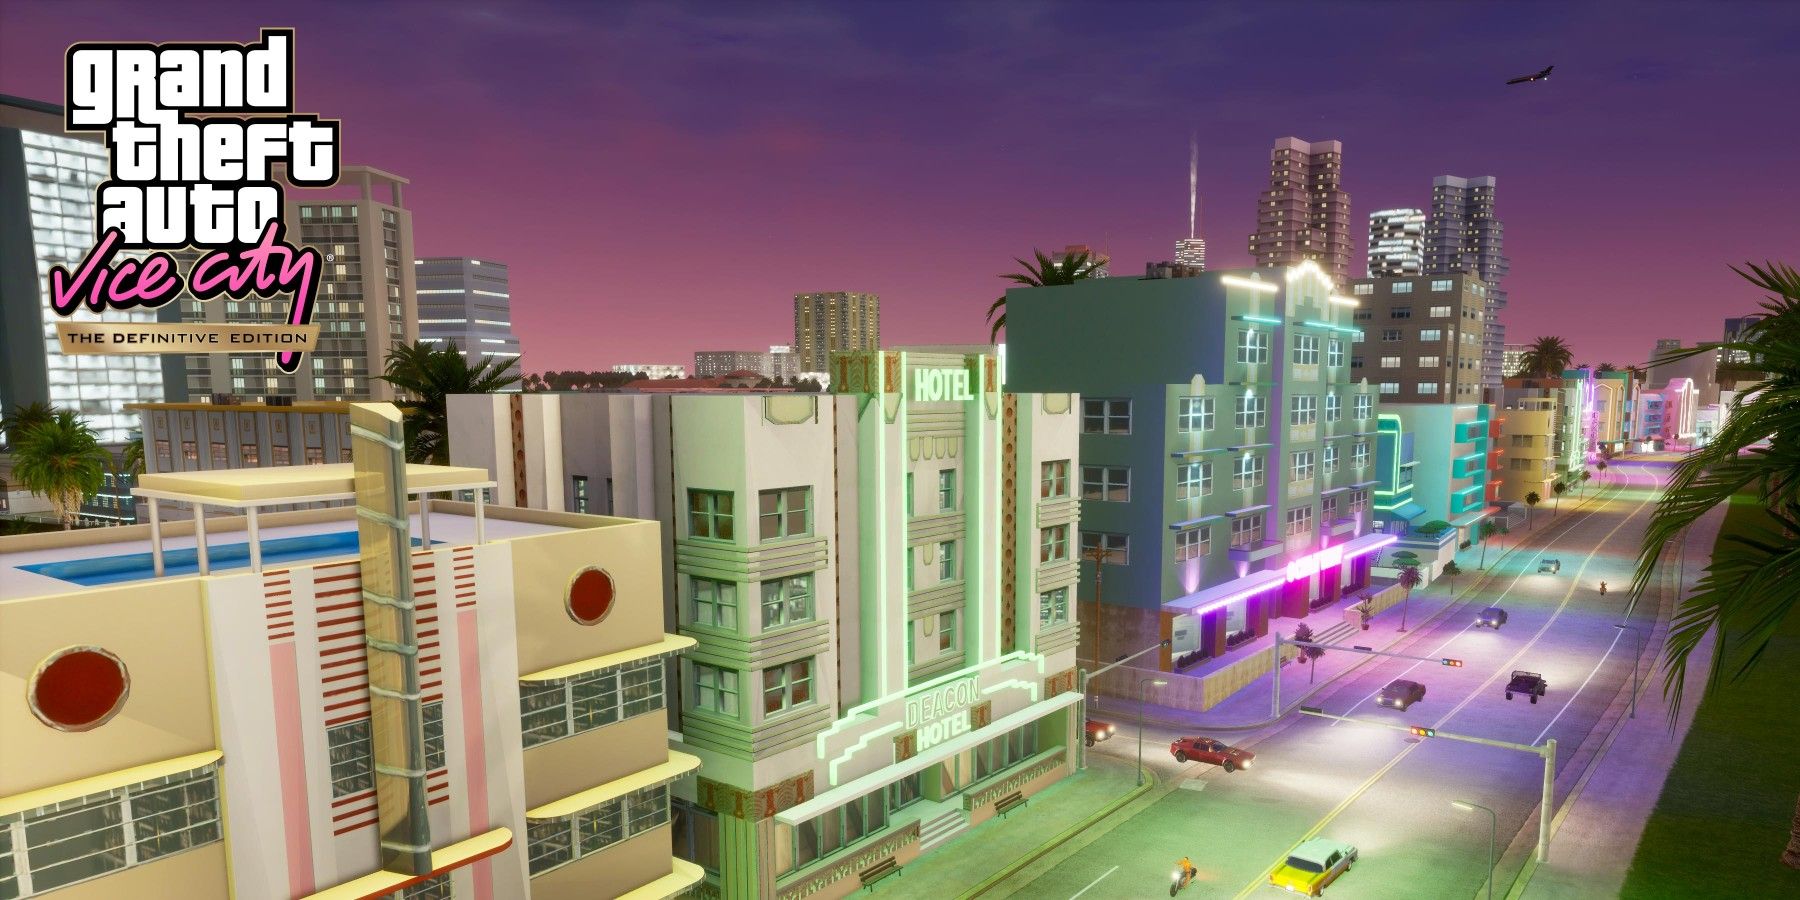 Grand Theft Auto Fan Builds Cardboard Version of Vice City